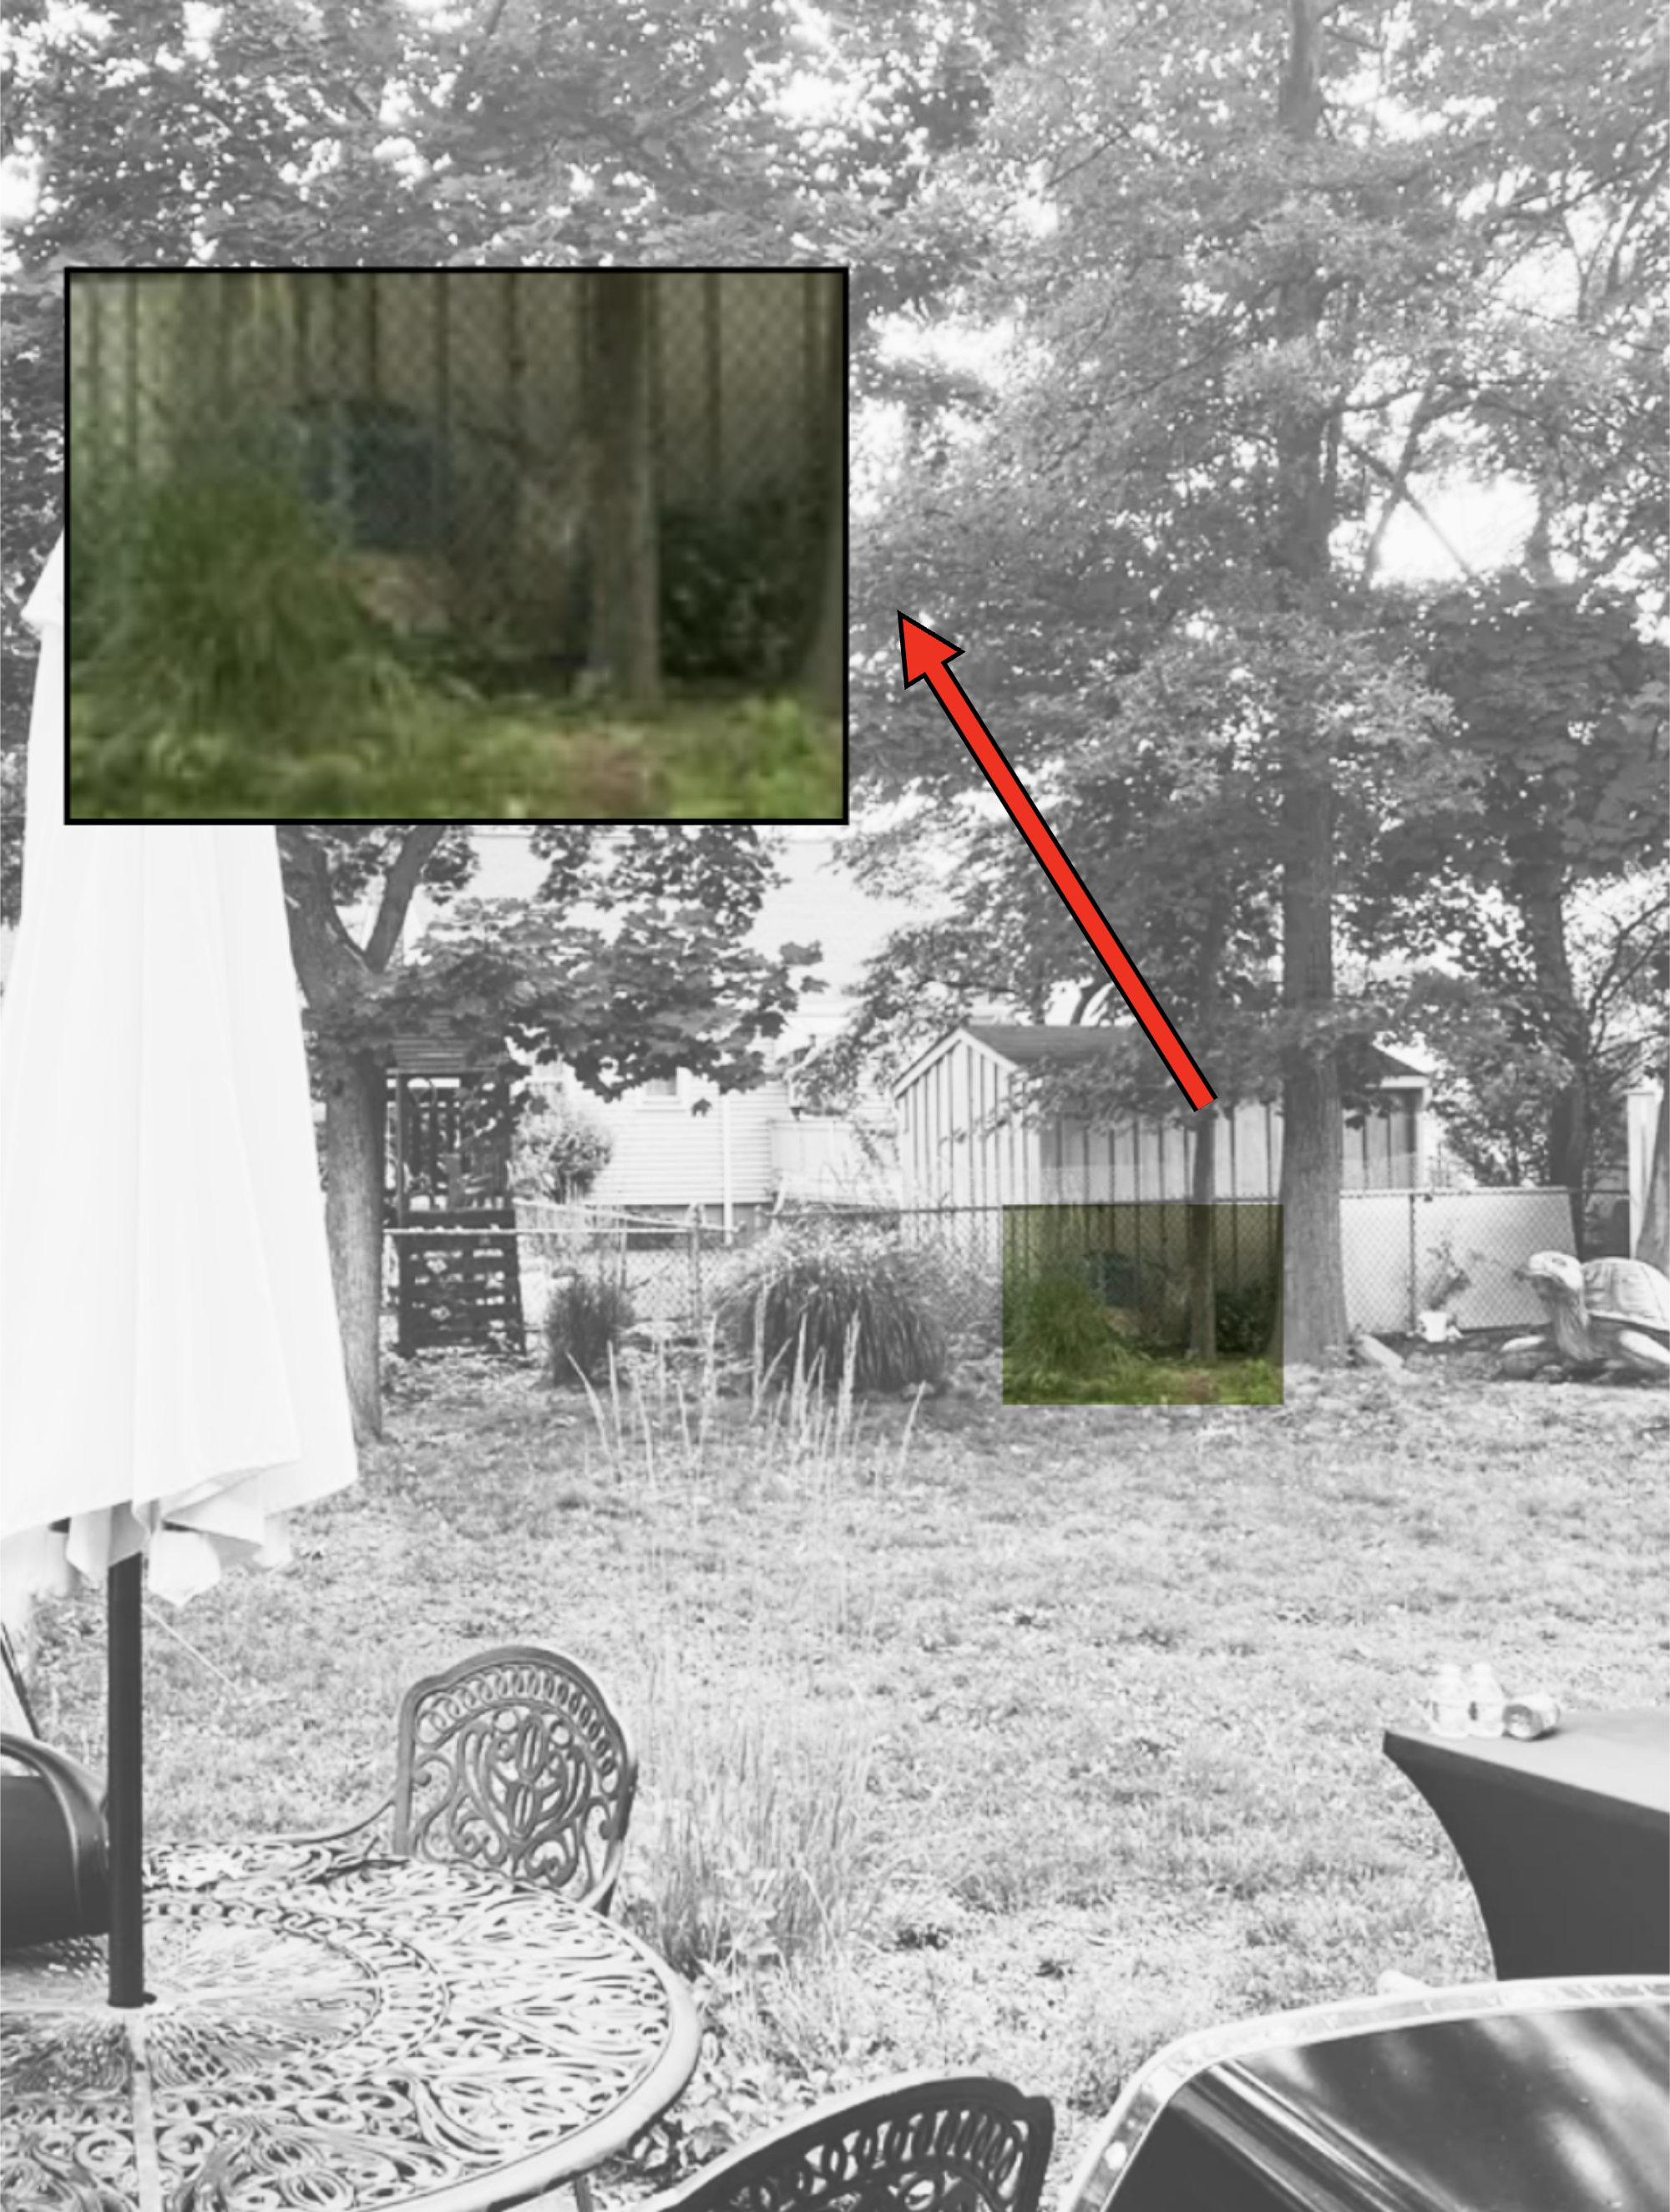 A backyard scene with furniture and trees. The inset shows a zoomed-in part of the yard with a sleeping lion near a fence